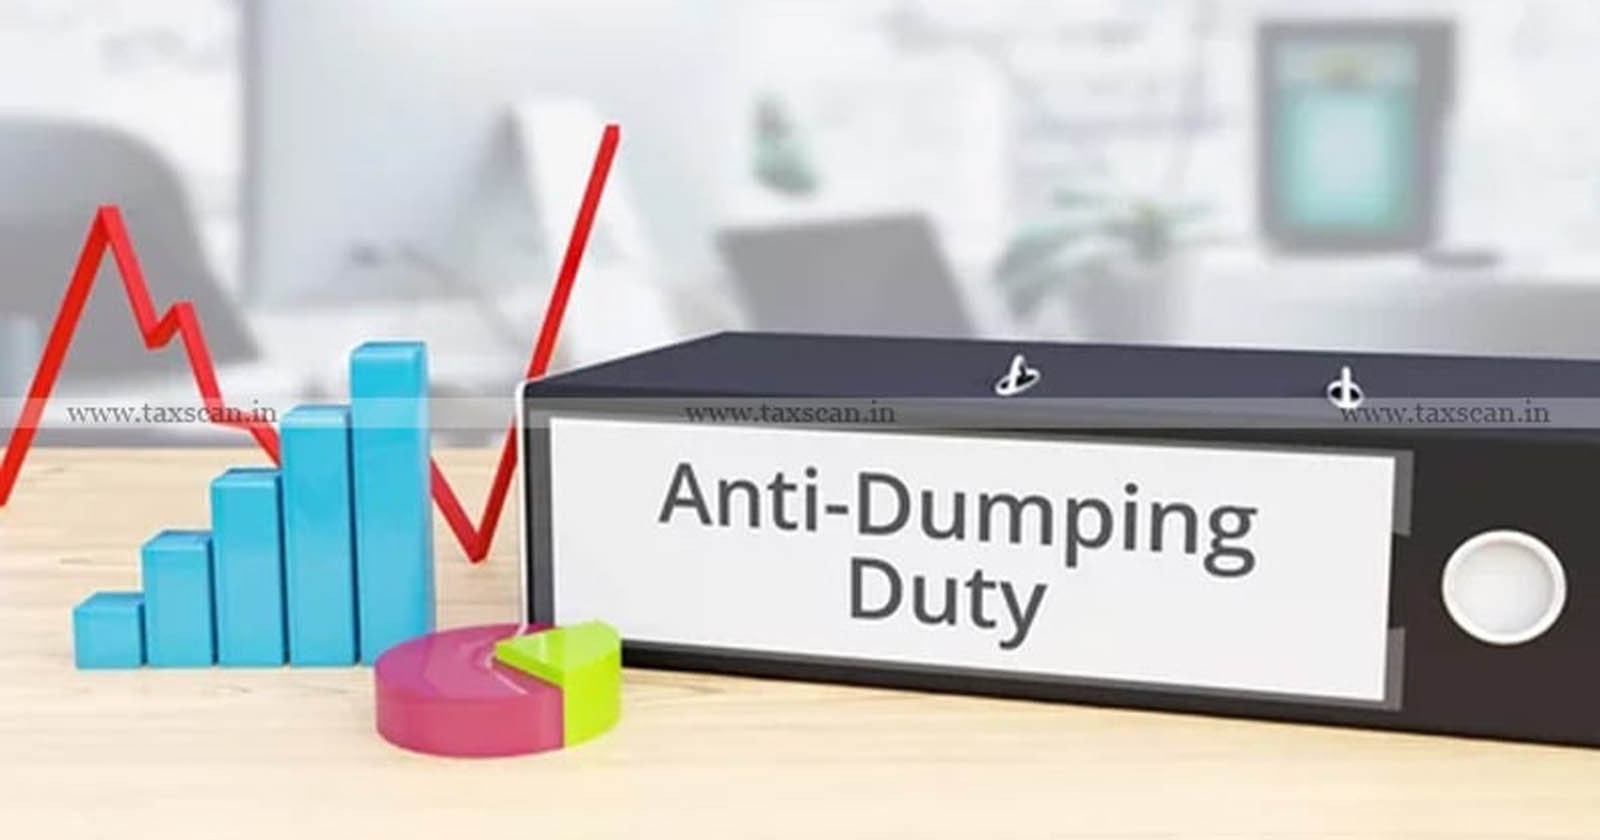 CBIC imposes Anti-Dumping Duty - Gypsum Tiles and Boards - Anti-Dumping Duty - TAXSCAN